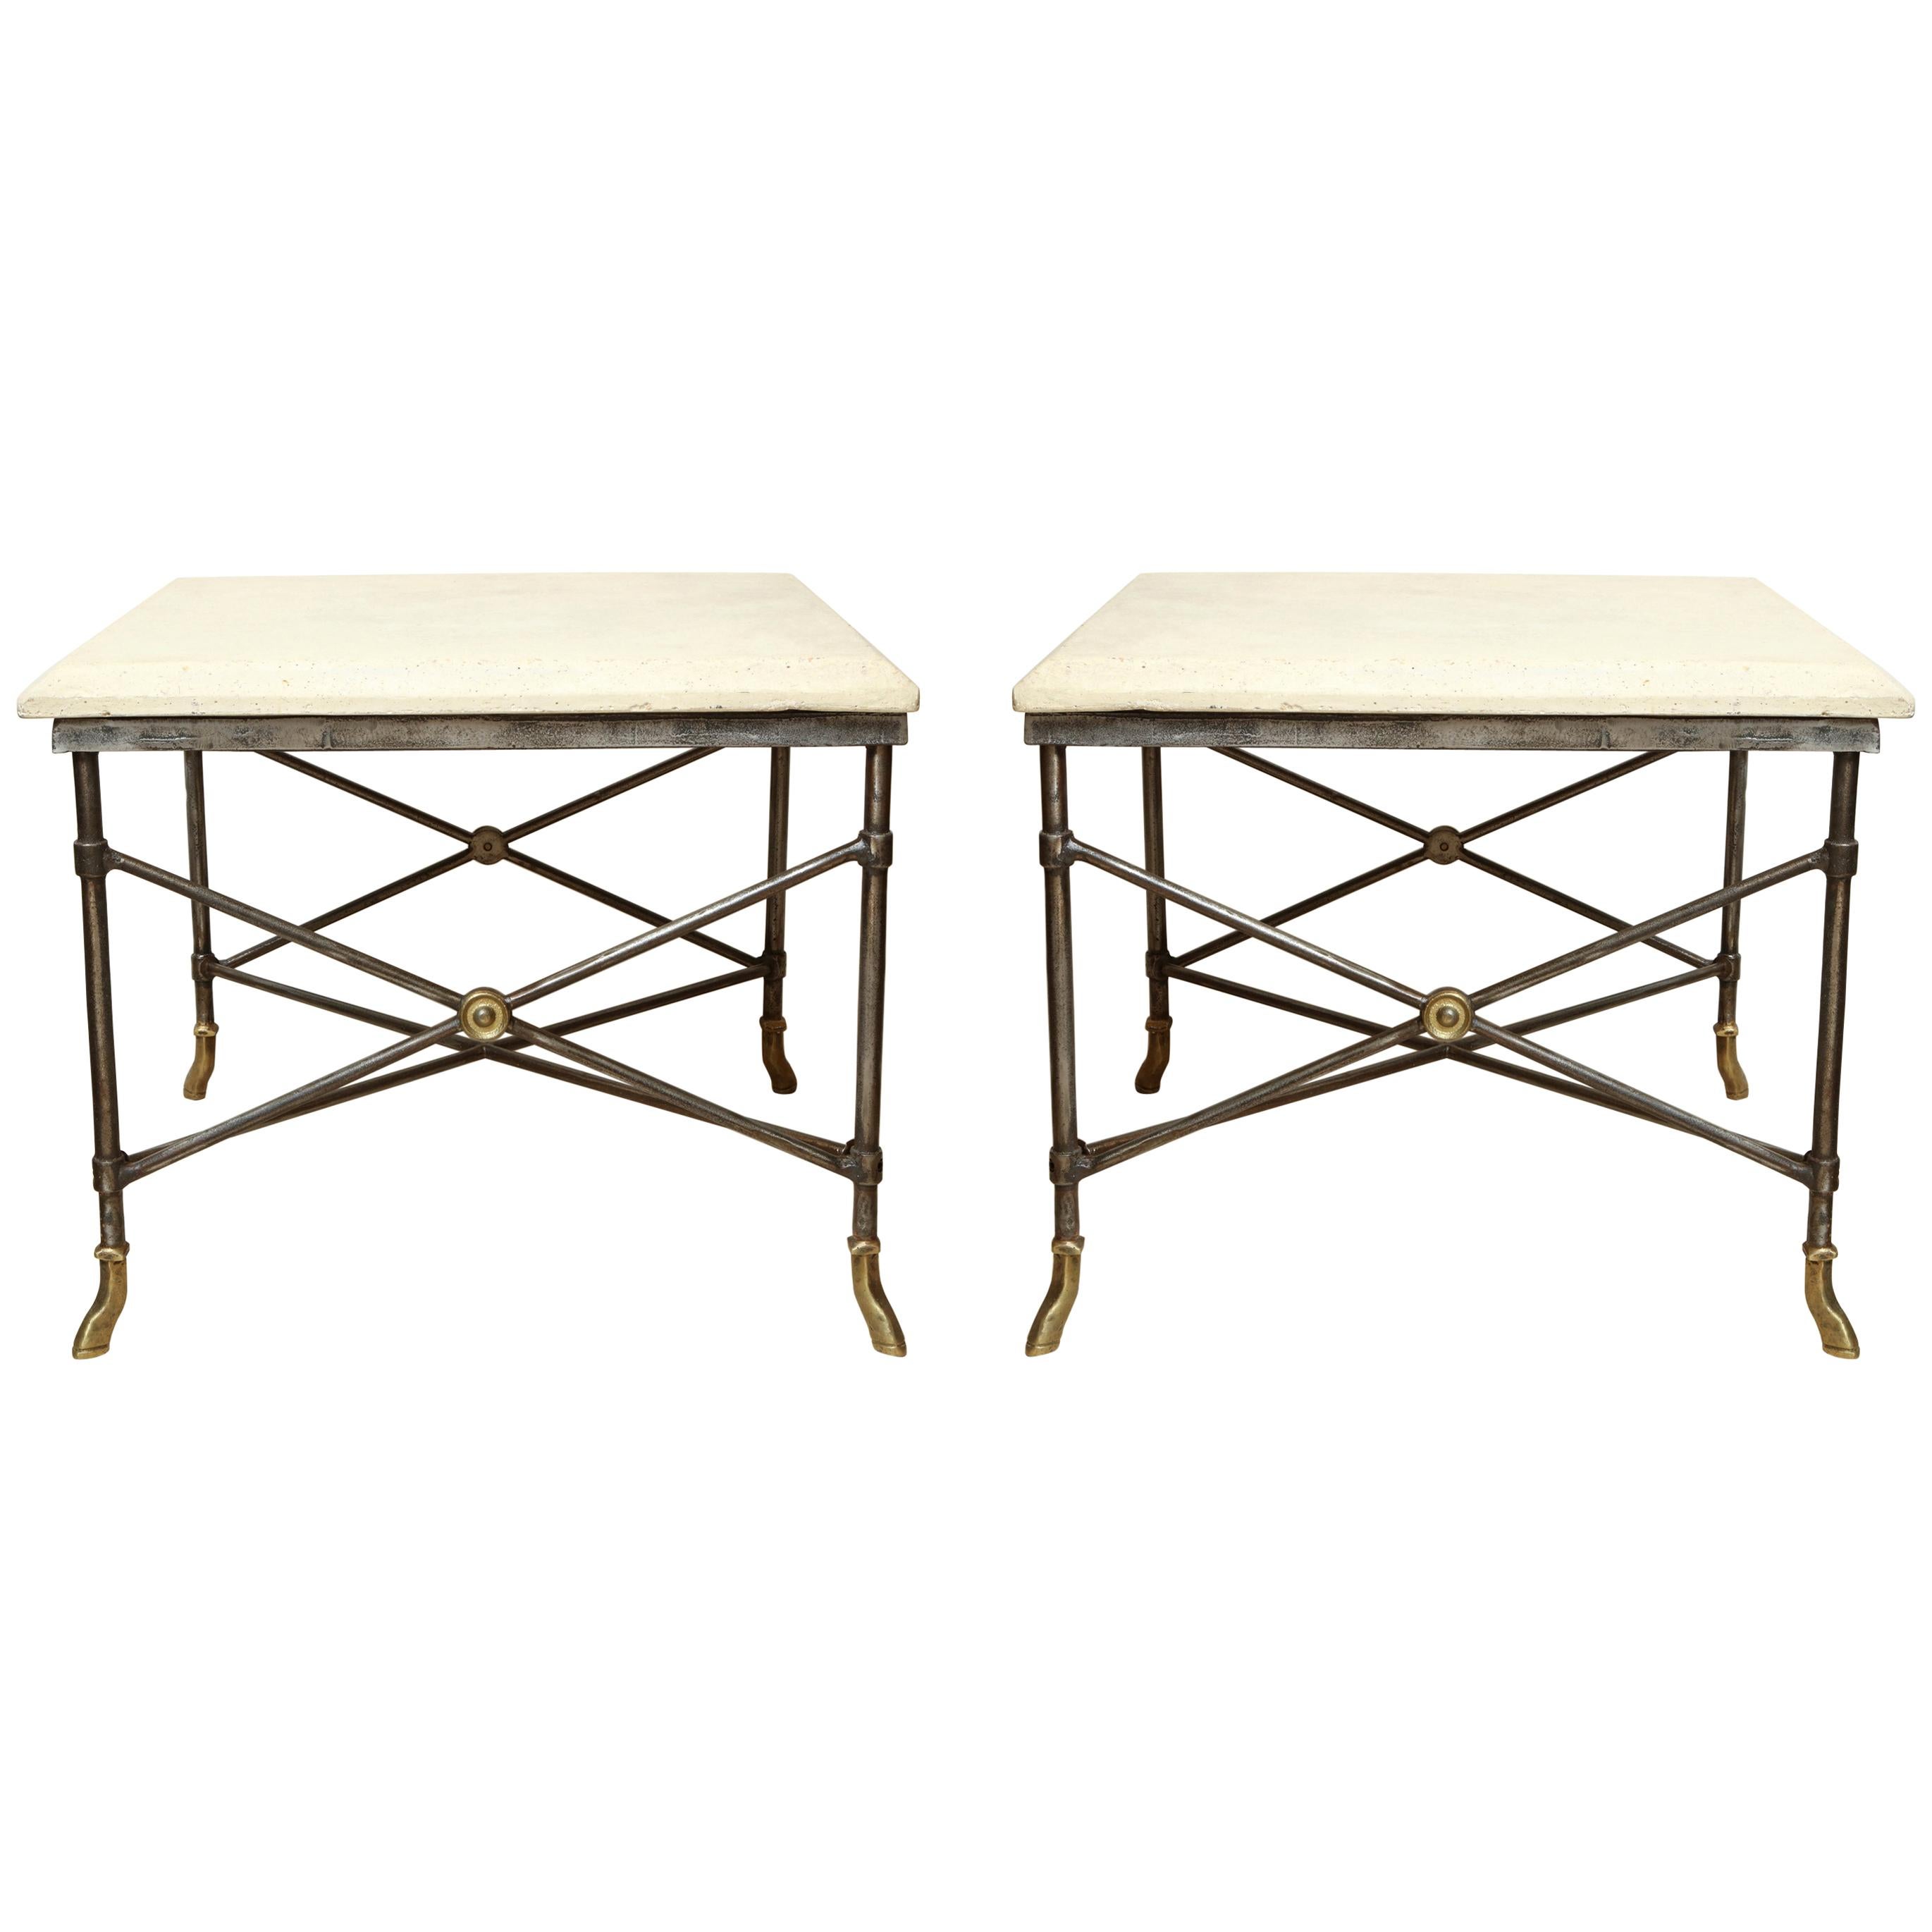 Pair of Midcentury Square Metal Side Tables with Limestone Tops For Sale